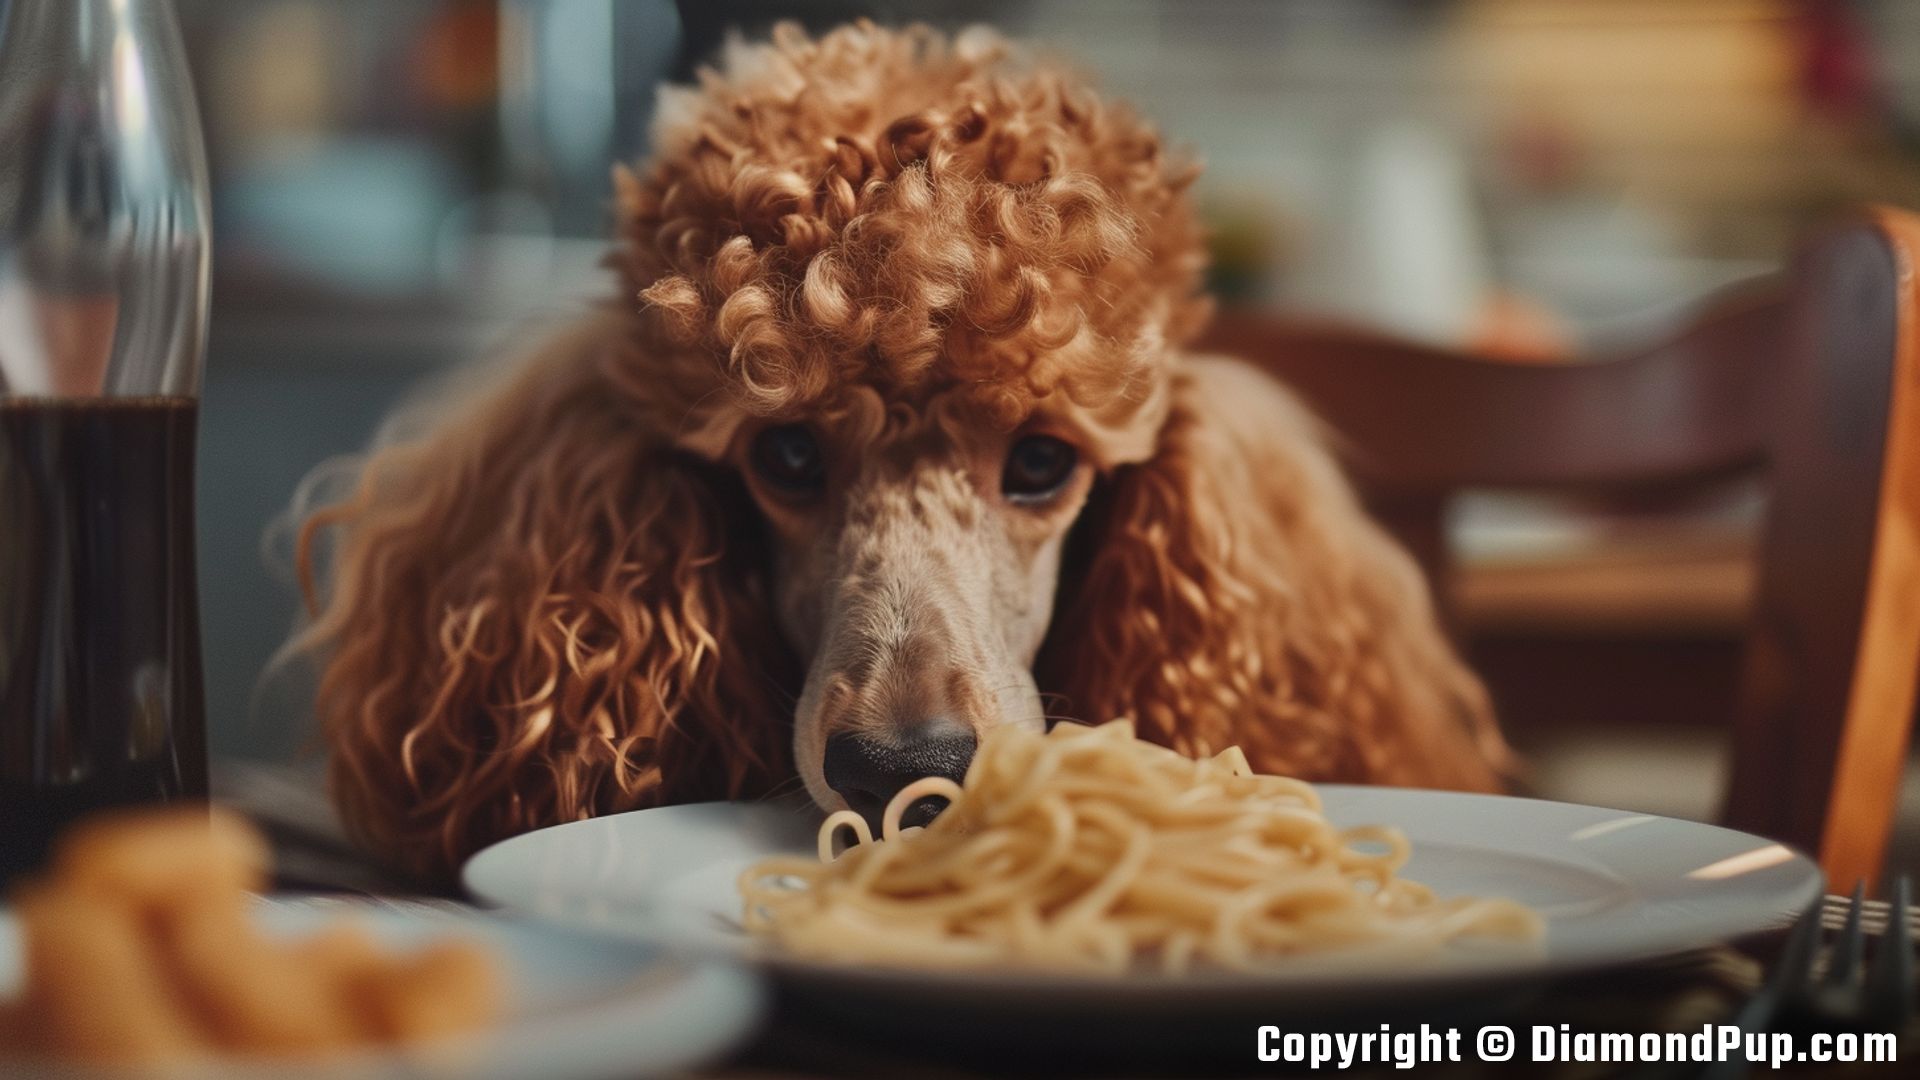 Photo of a Cute Poodle Eating Pasta